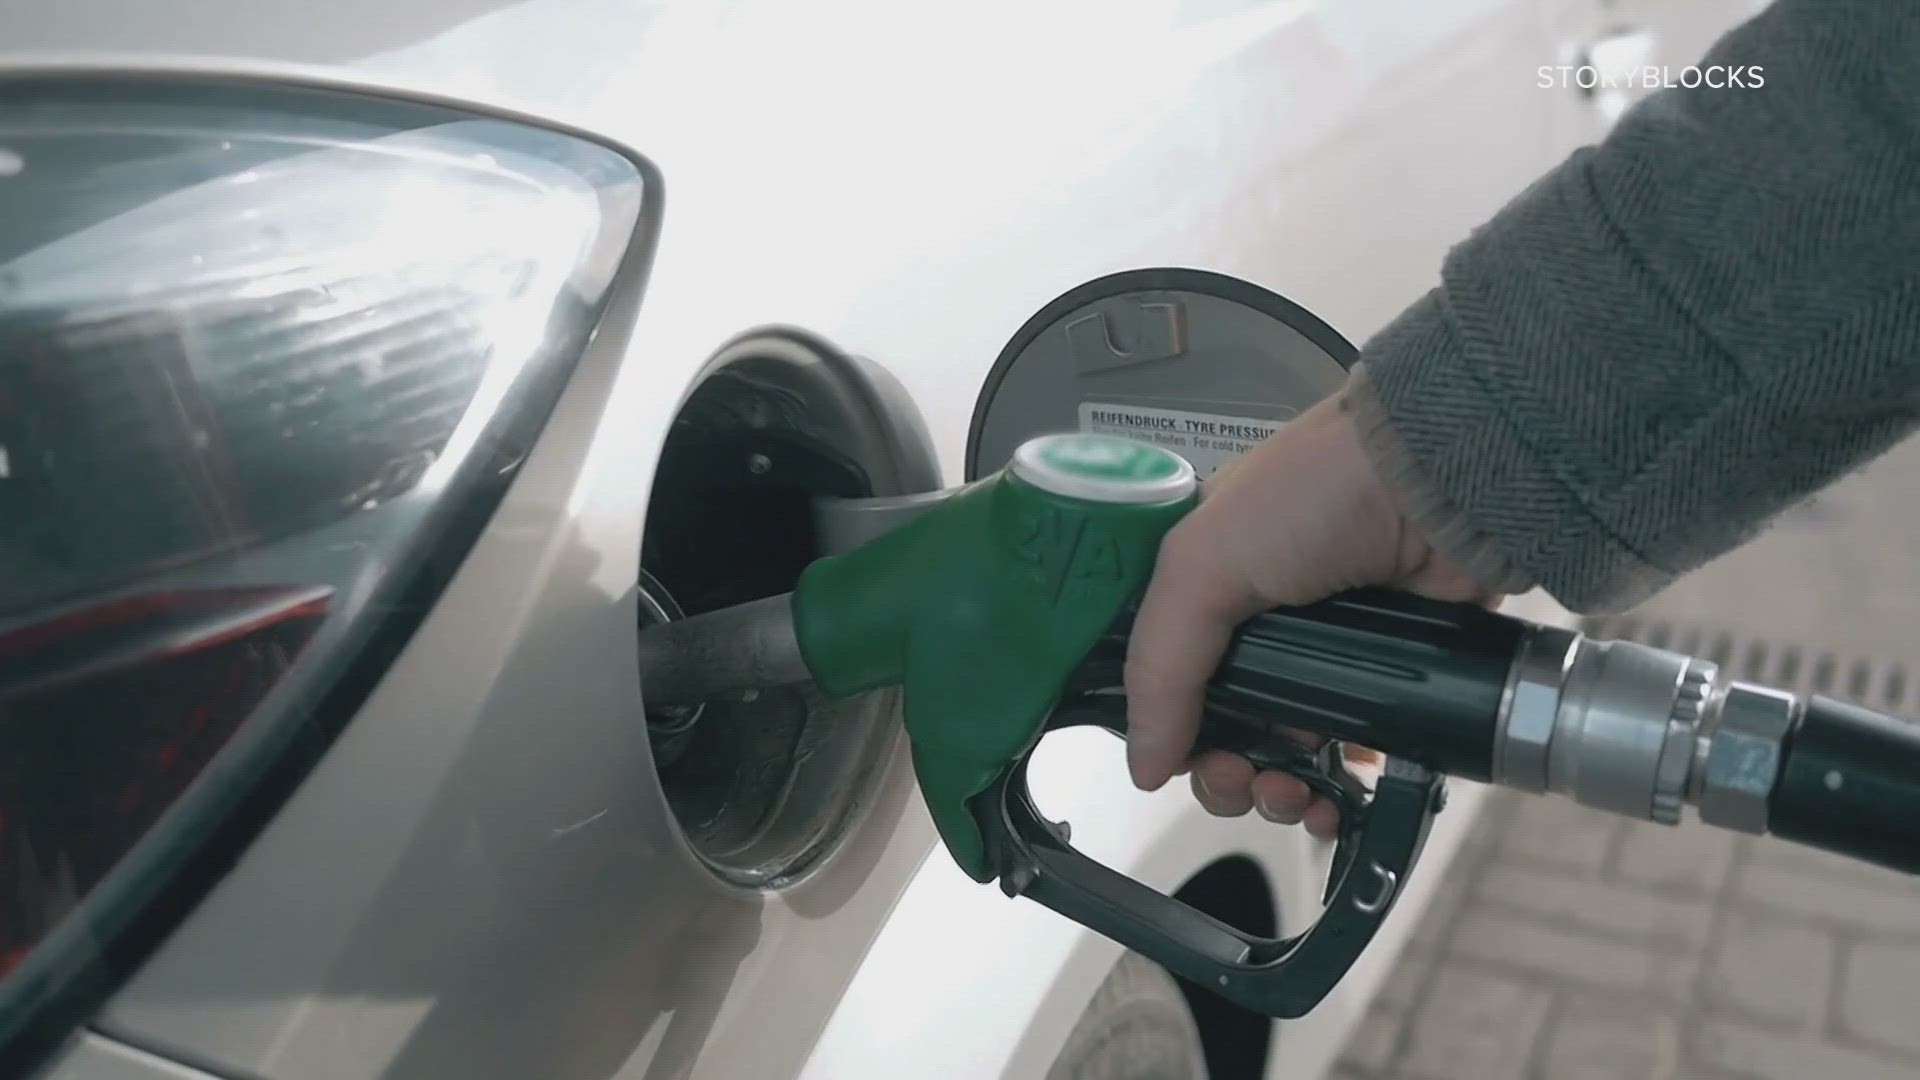 Social media is full of videos promising money-saving tips at the pump, but waiting for a certain day to fill up is not proven to be one of them.